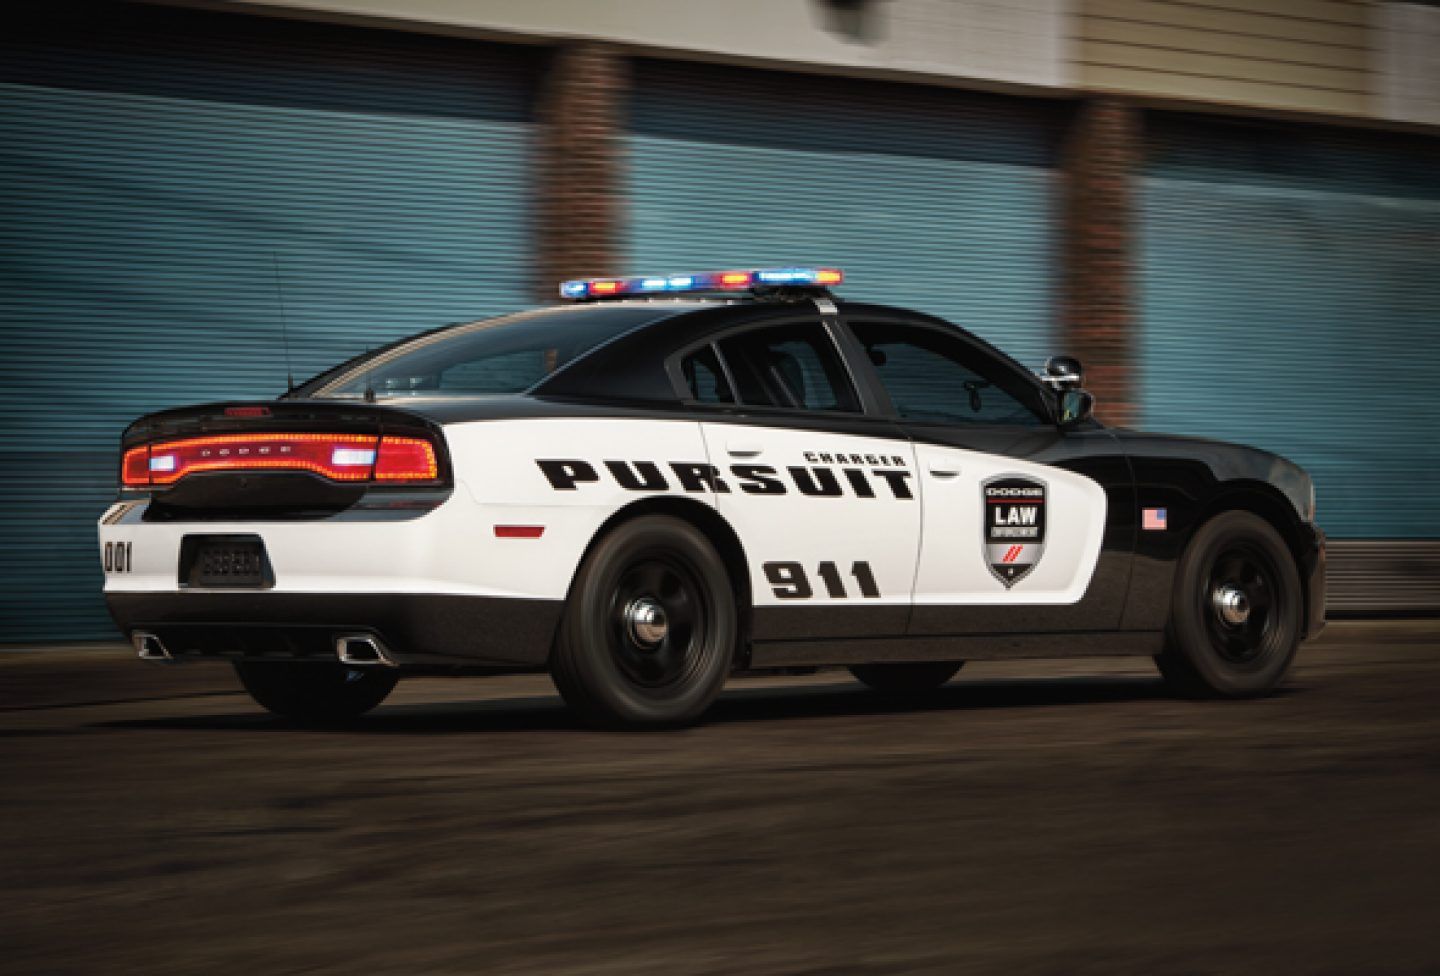 Black and White Dodge Charger Pursuit police car while serving